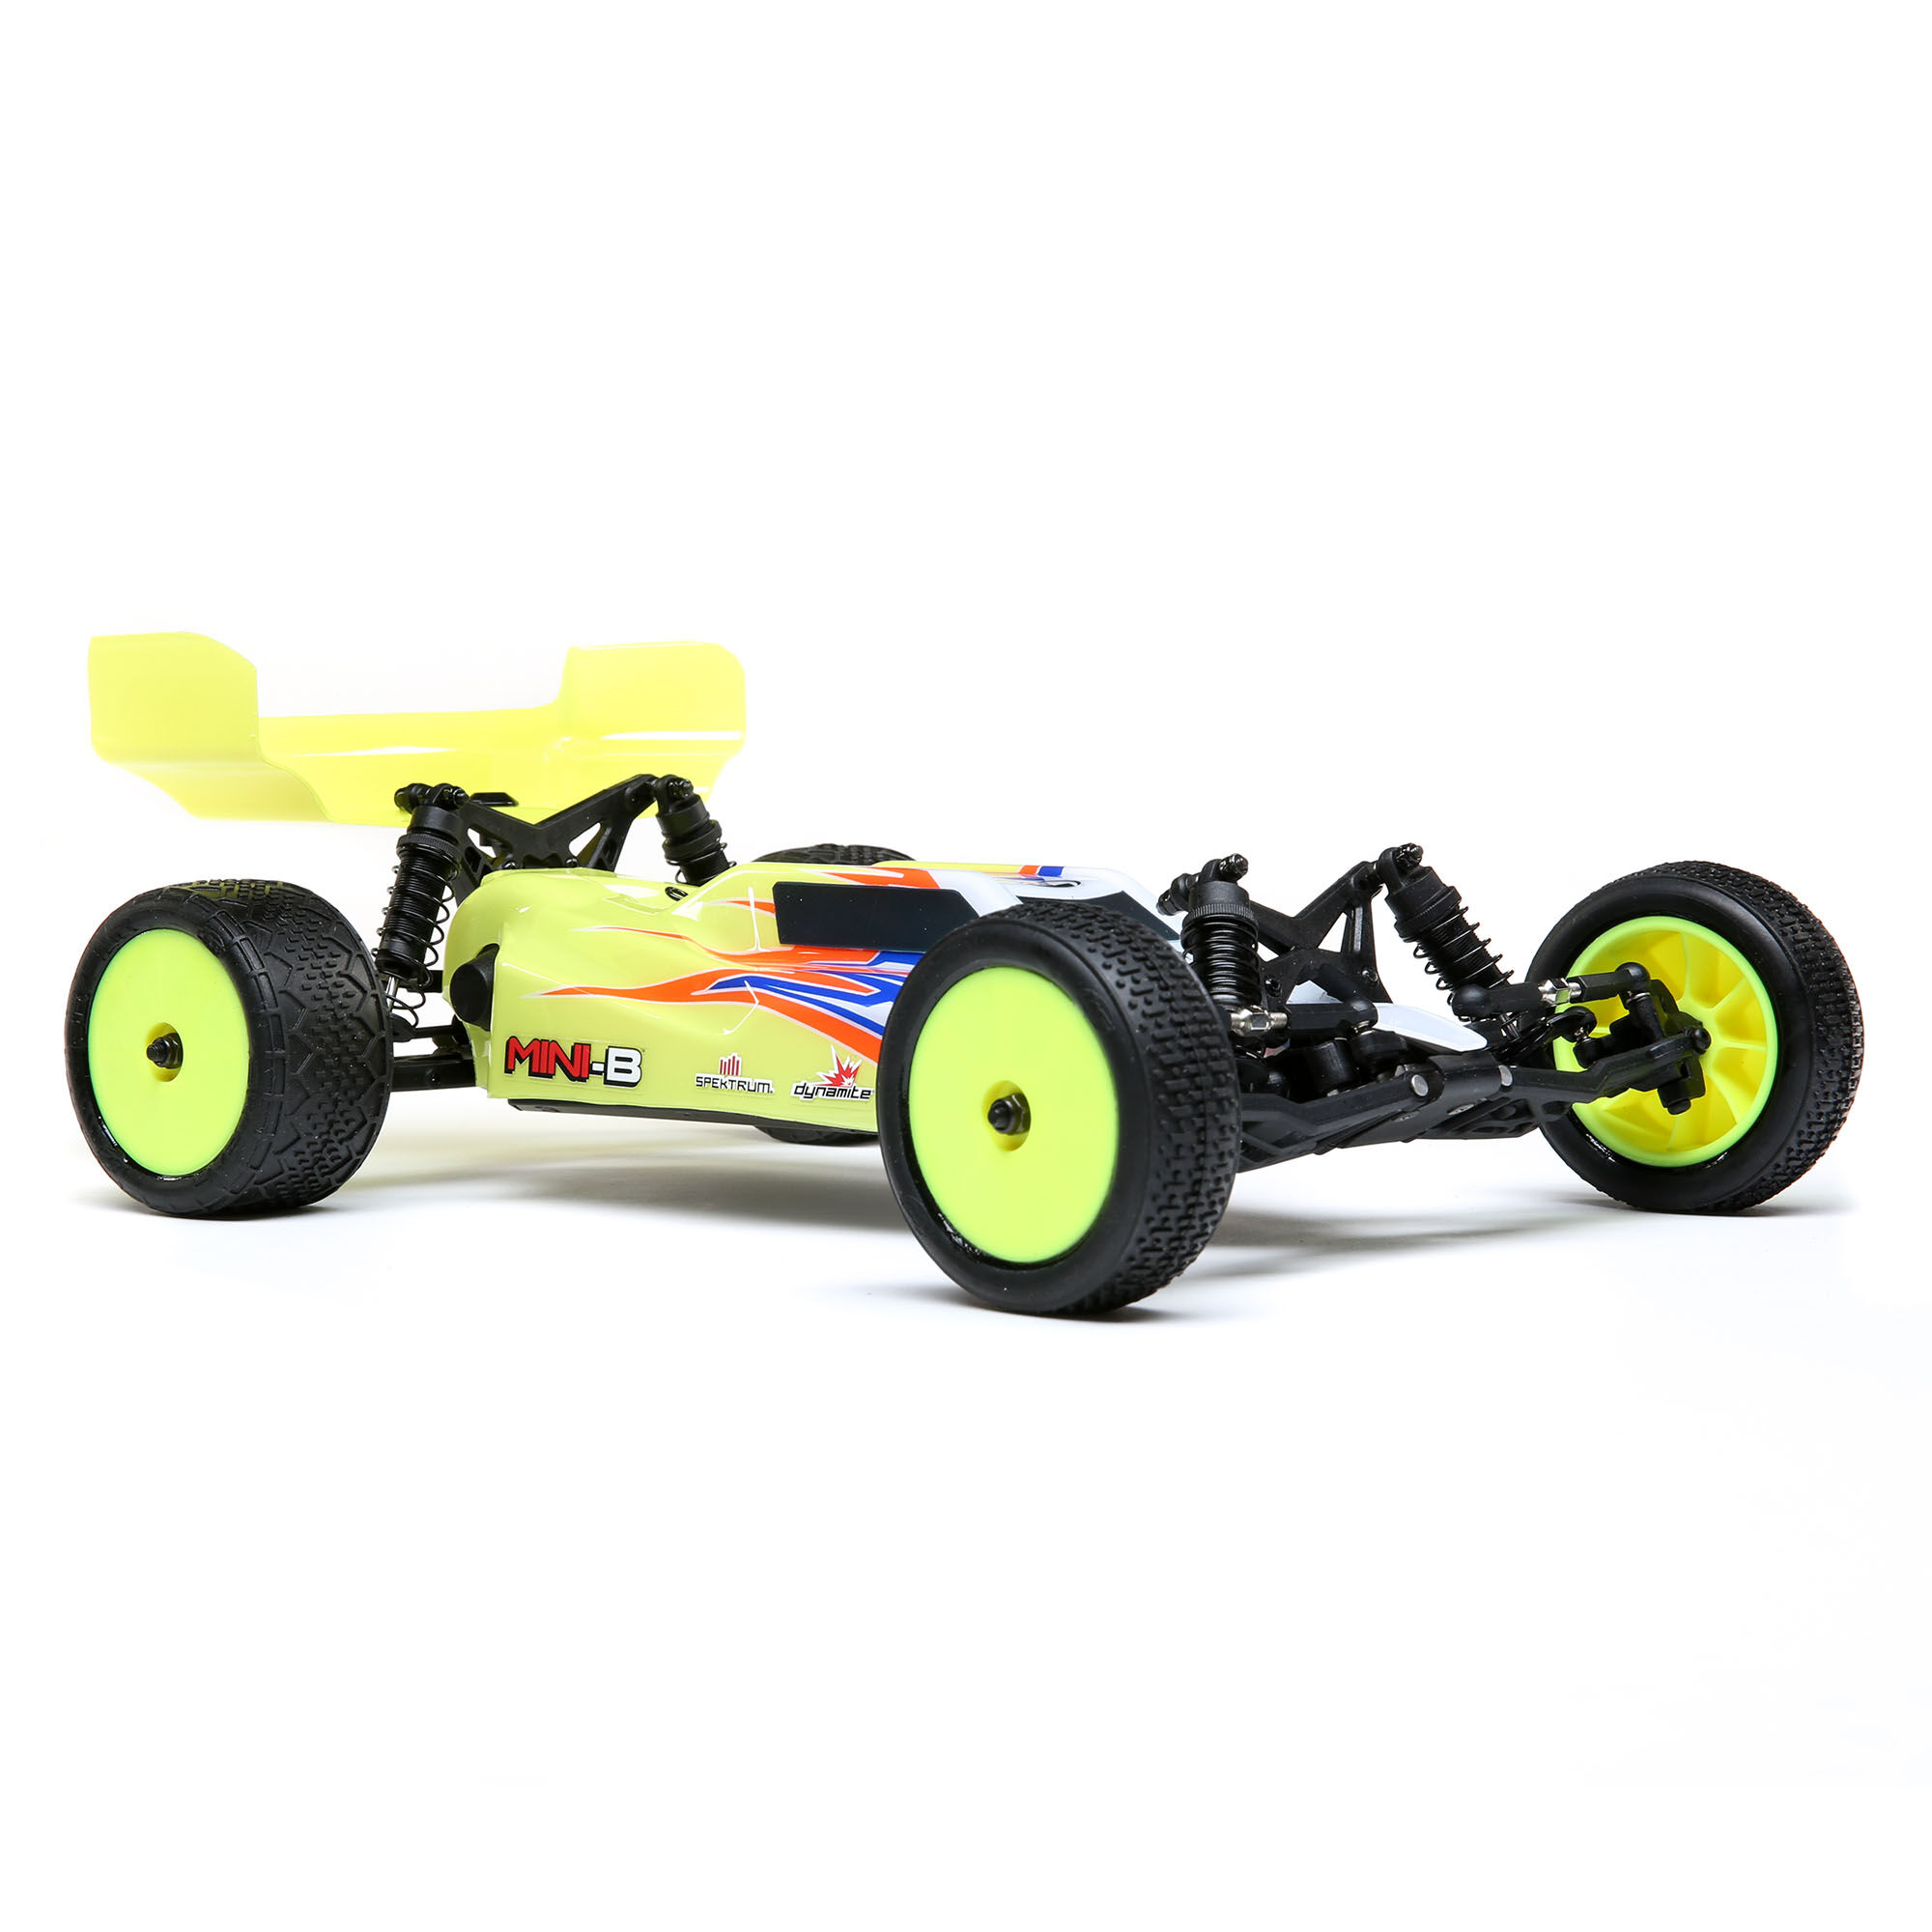 Losi LOS01016T3 1/16 Mini-b Brushed RTR 2wd Buggy Yellow for sale online